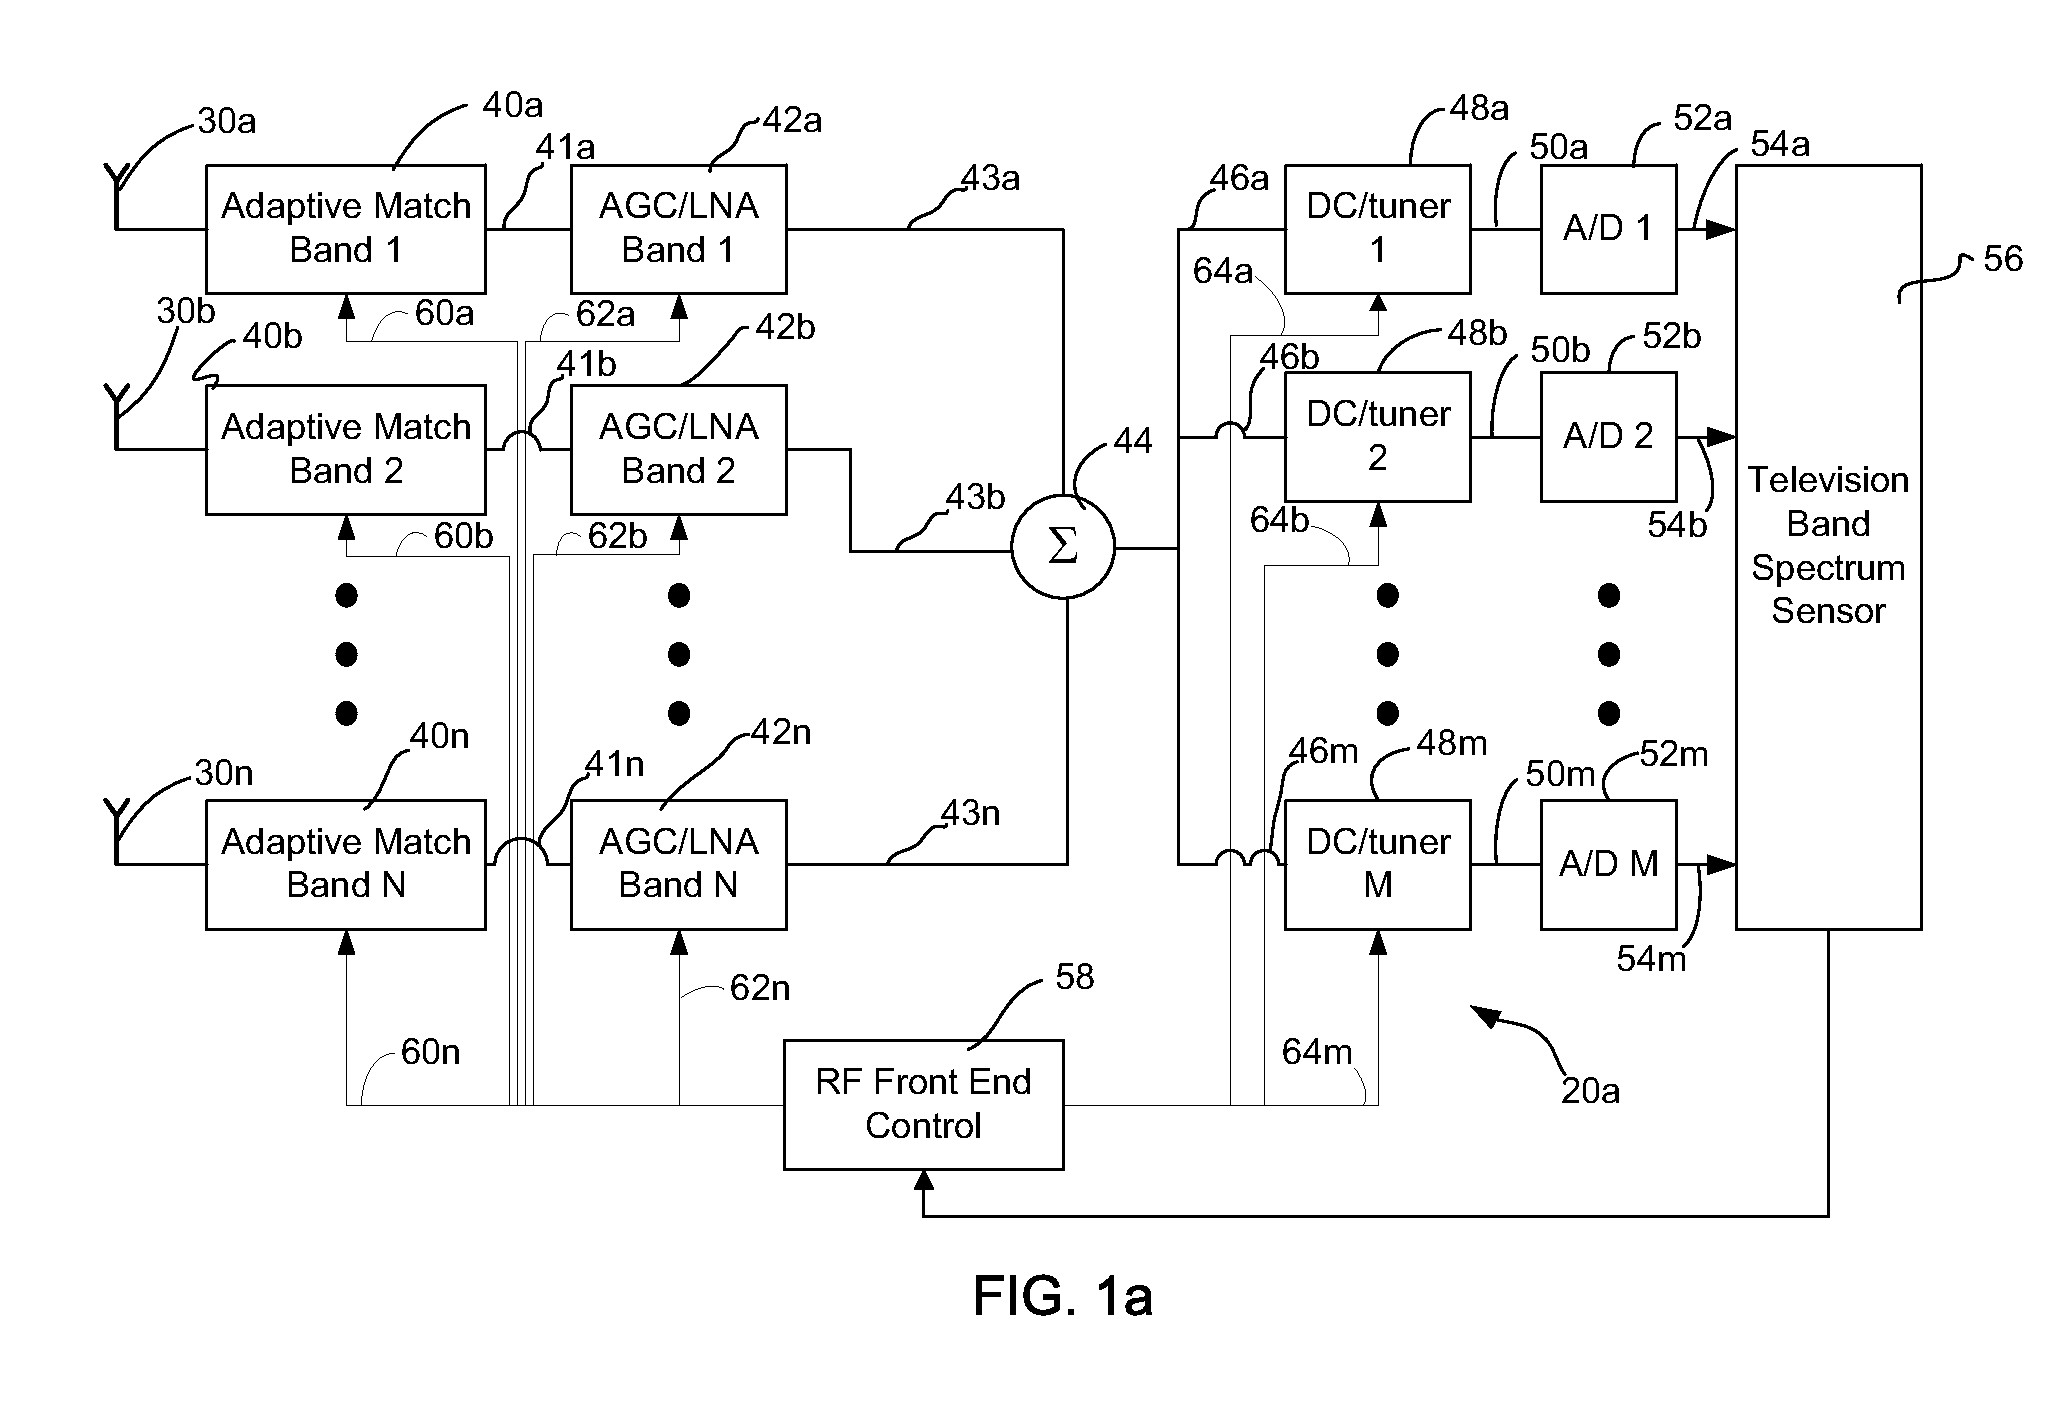 Radio frequency front end for television band receiver and spectrum sensor